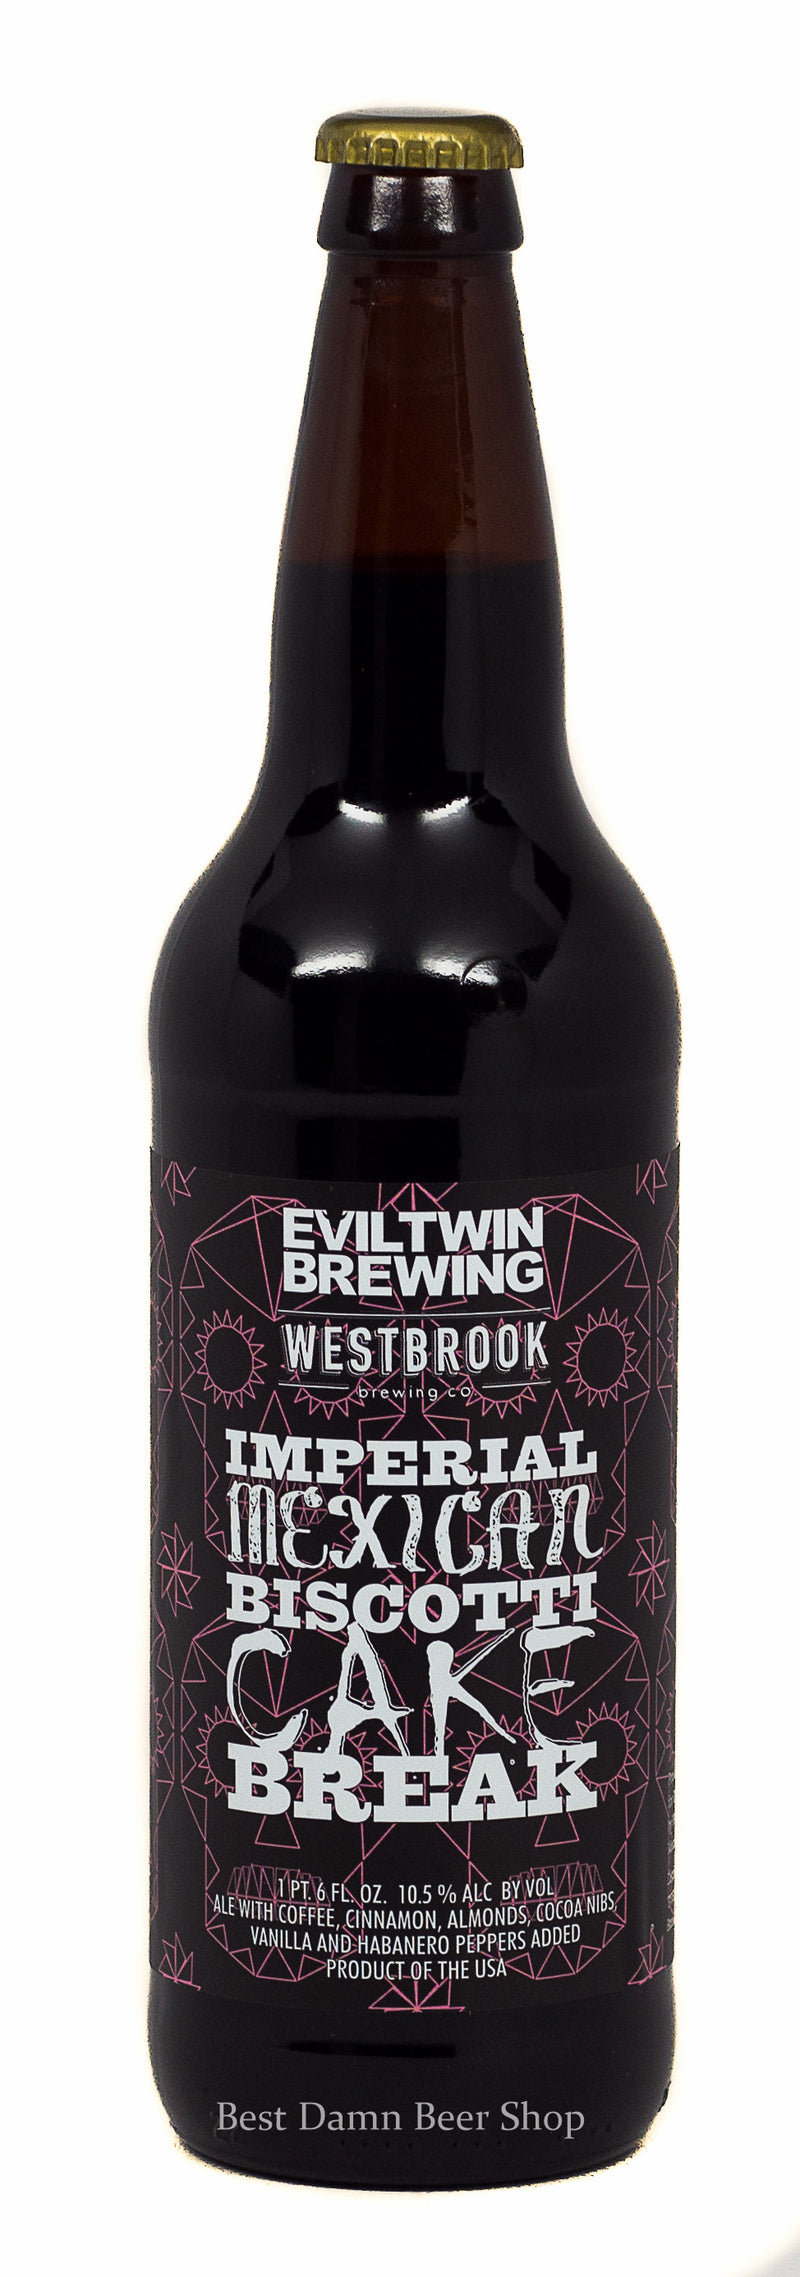 Westbrook/Evil Twin collab Imperial Mexican Biscotti Cake Break 22oz